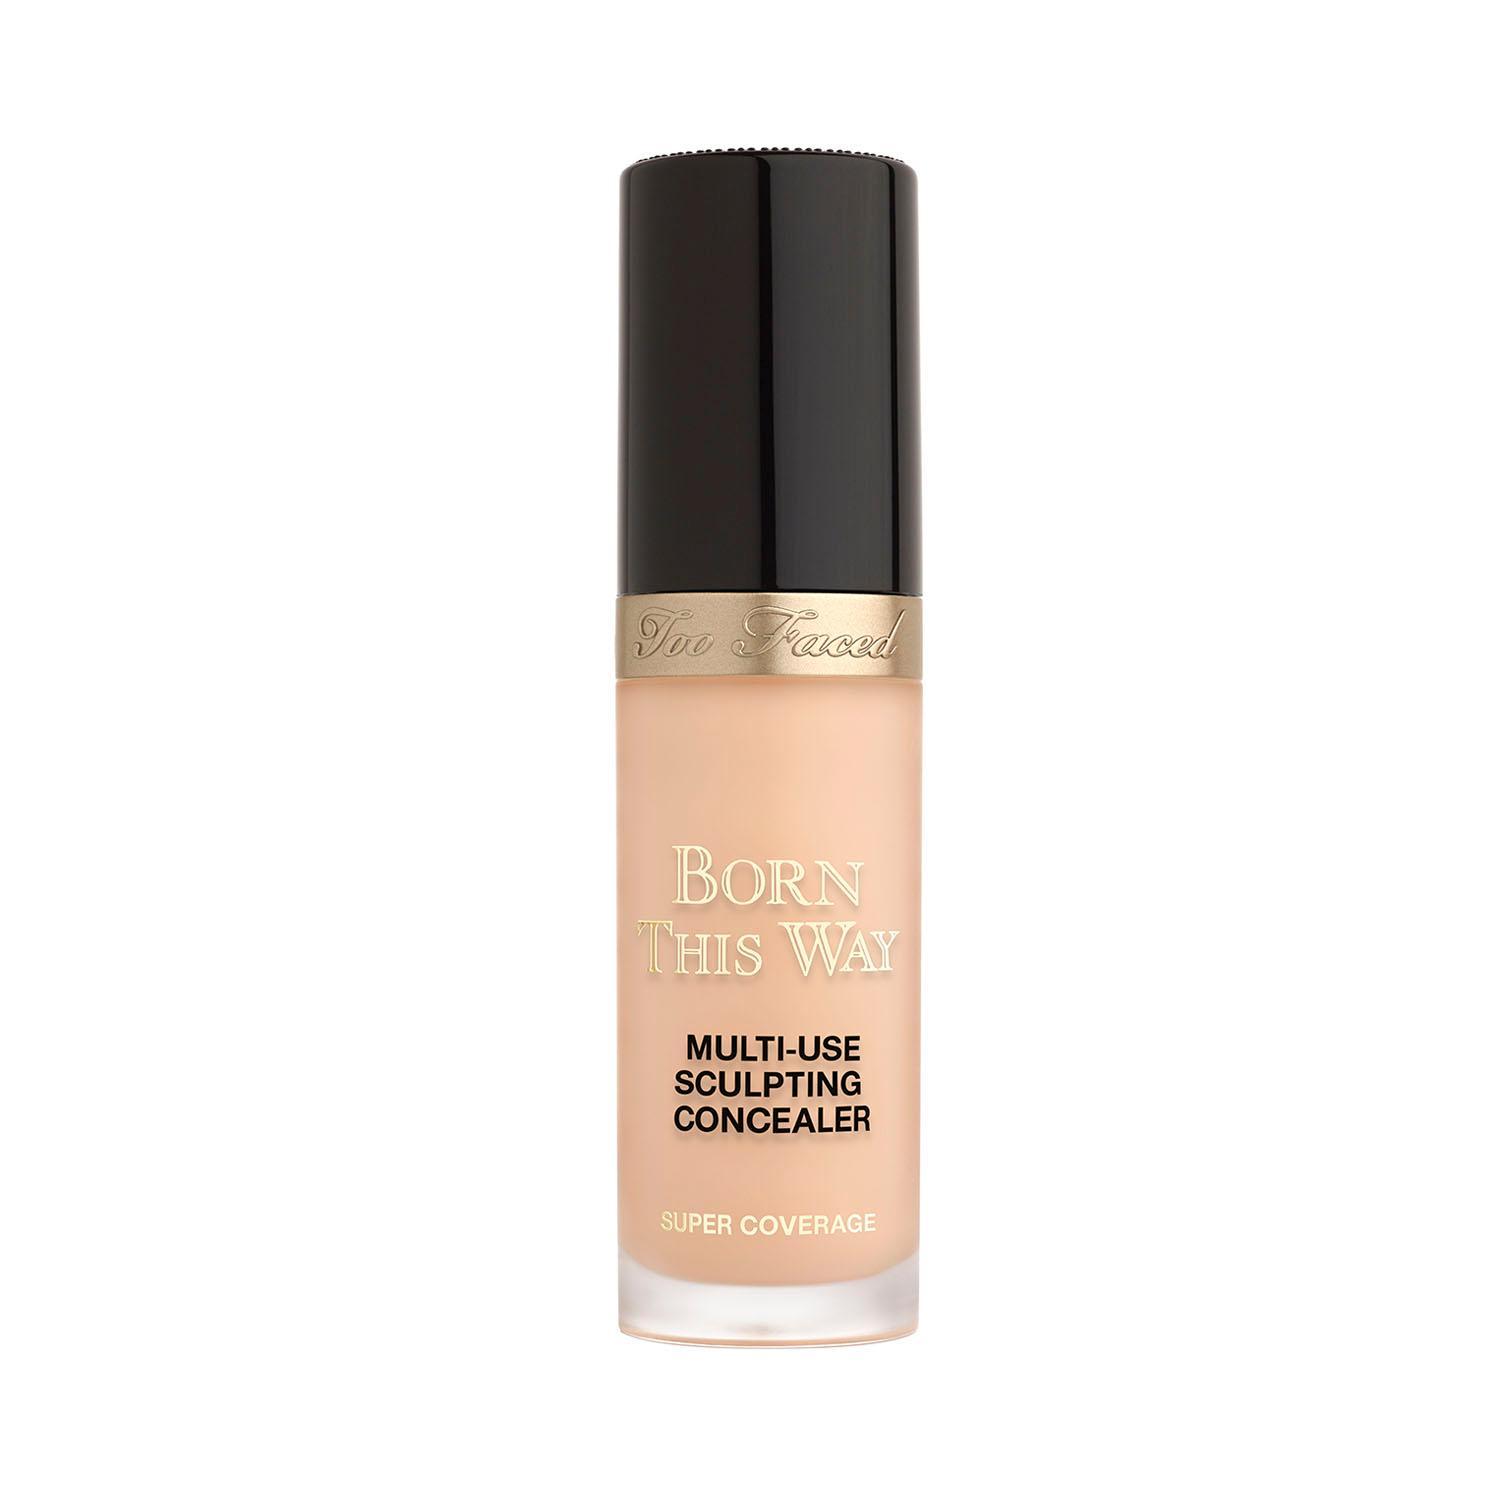 too faced born this way super coverage multi use sculpting concealer - seashell (13.5ml)